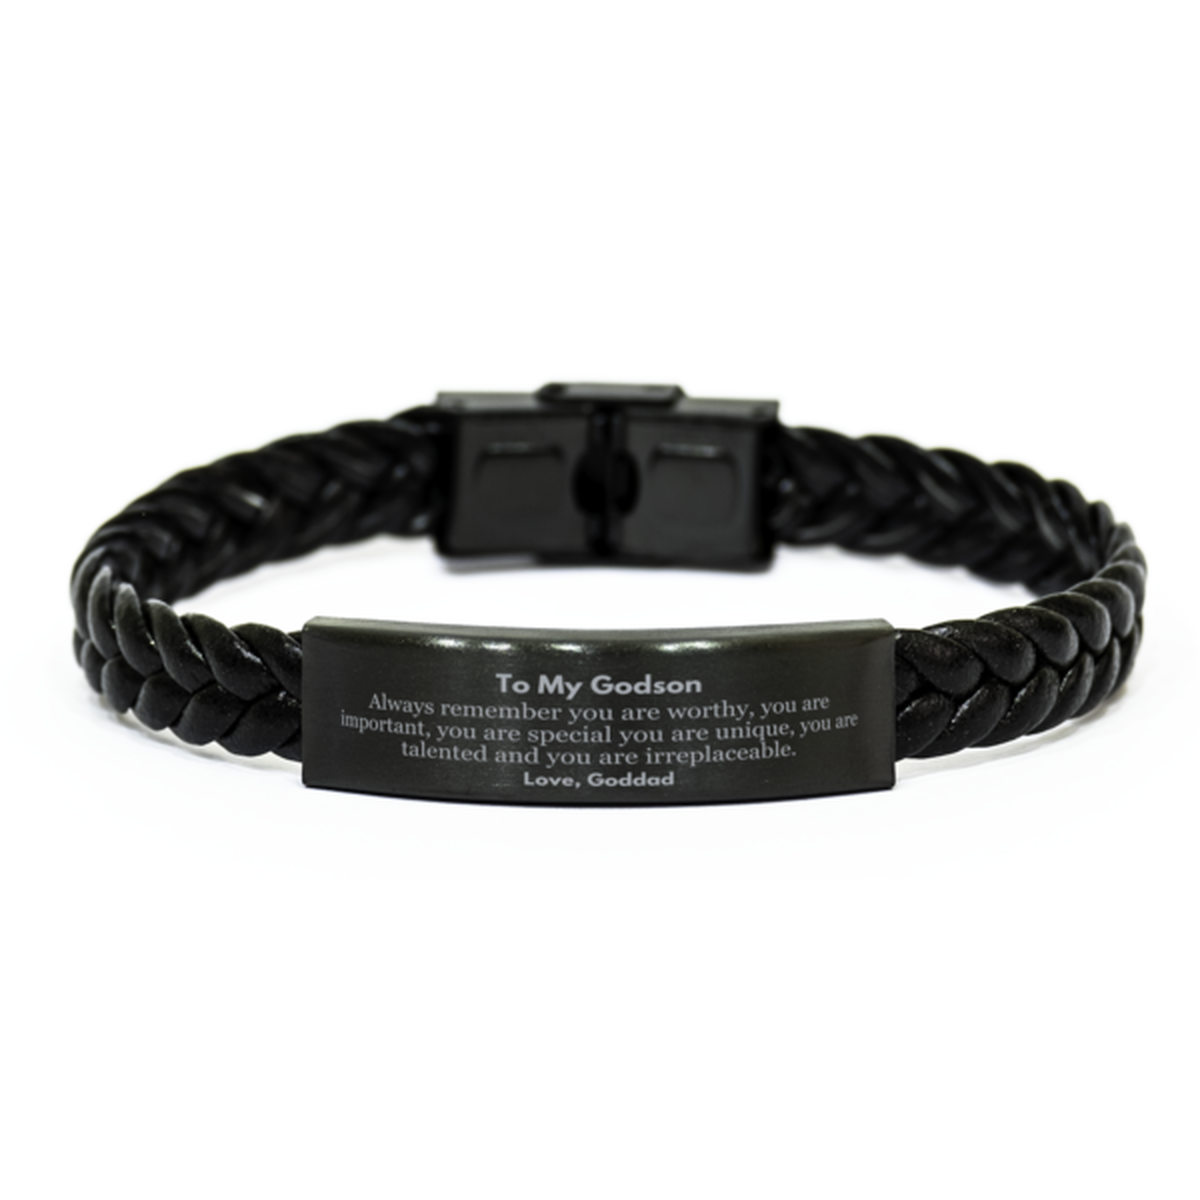 Godson Birthday Gifts from Goddad, Inspirational Braided Leather Bracelet for Godson Christmas Graduation Gifts for Godson Always remember you are worthy, you are important. Love, Goddad